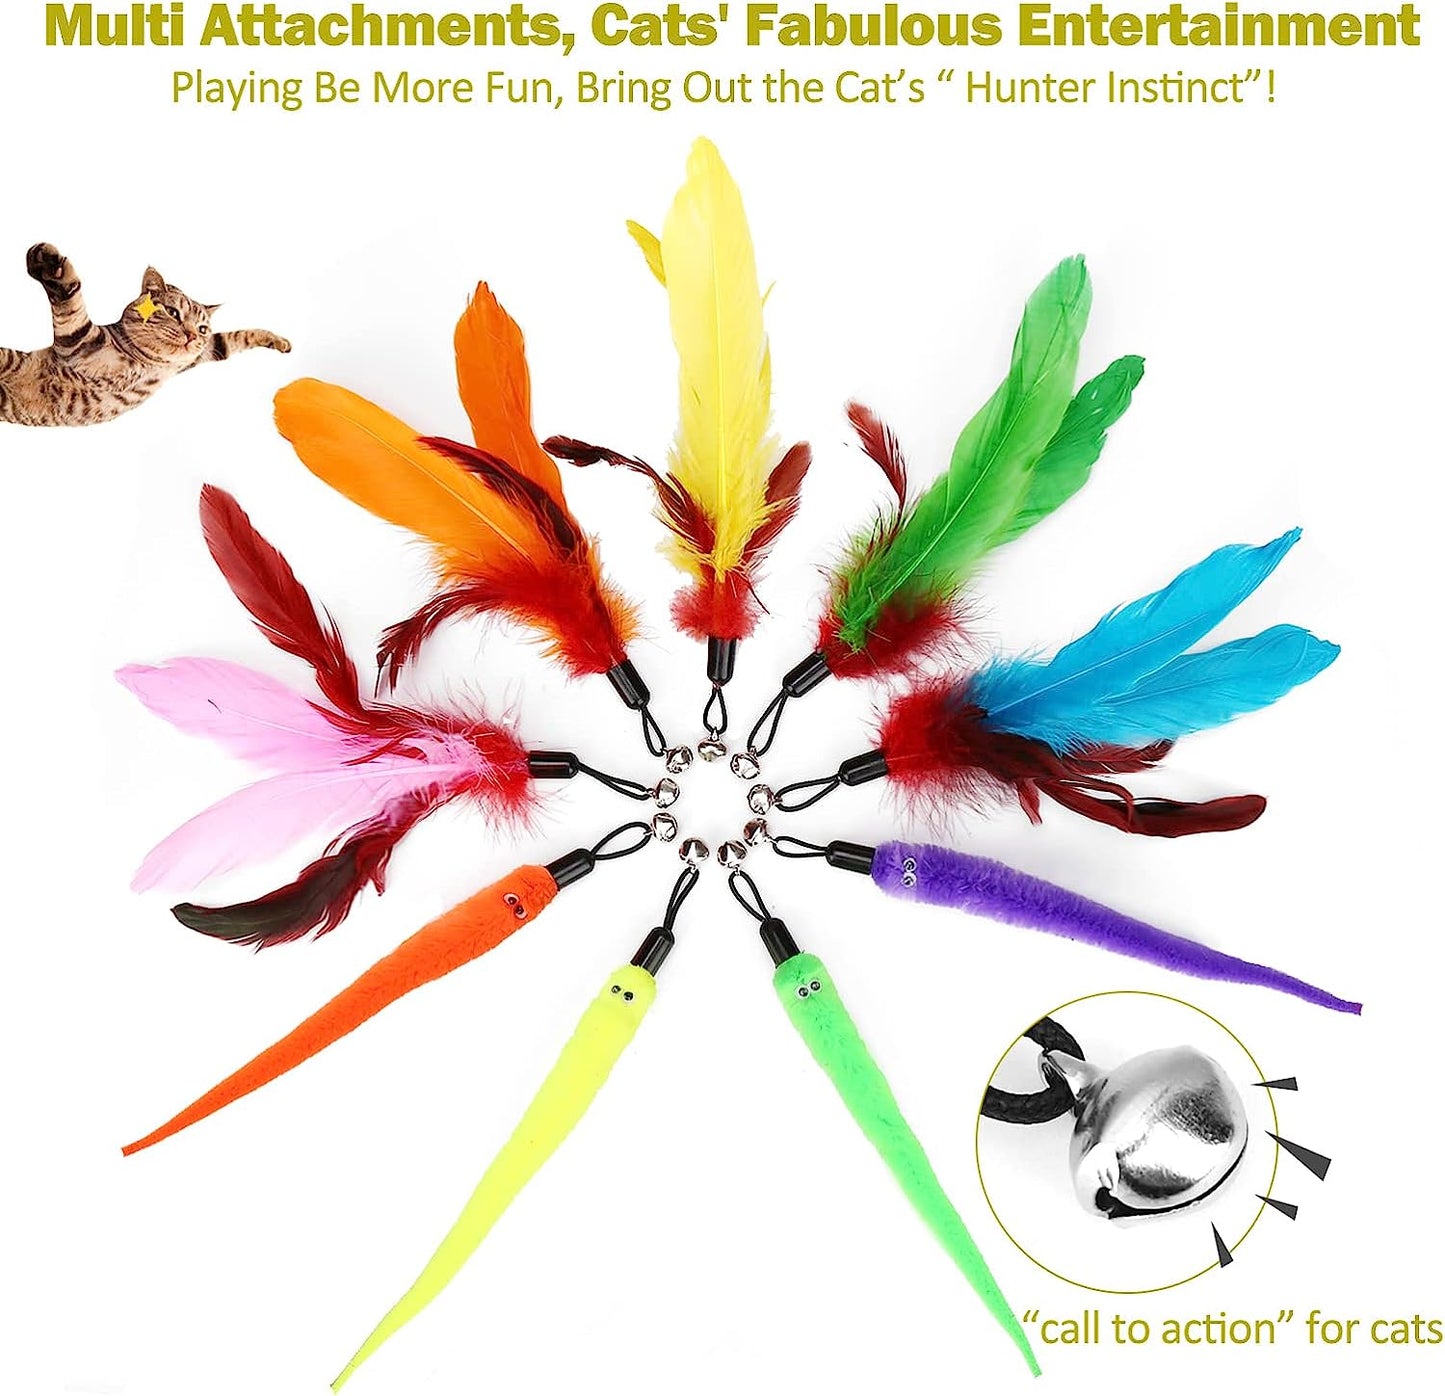 Cat Toys for Indoor Cats, Interactive Cat Toy 2PCS Retractable Cat Wand Toy and 9PCS Cat Feather Toys Refills, Funny Kitten Toys Cat Fishing Pole Toy for Bored Indoor Cats Chase and Exercise